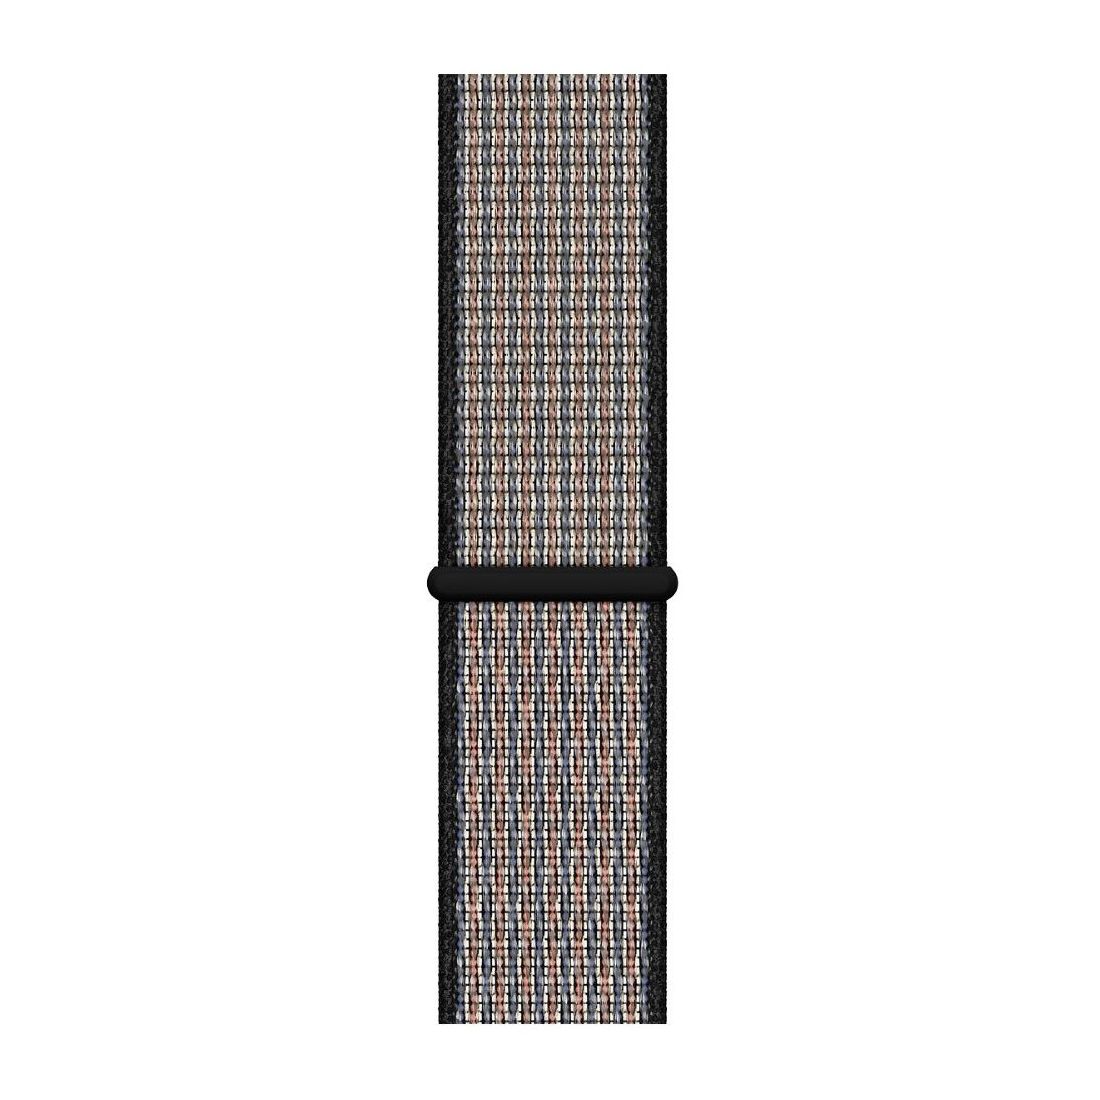 Apple 44mm Royal Pulse/Lava Glow Nike Sport Loop for Apple Watch (Compatible with Apple Watch 42/44/45mm)